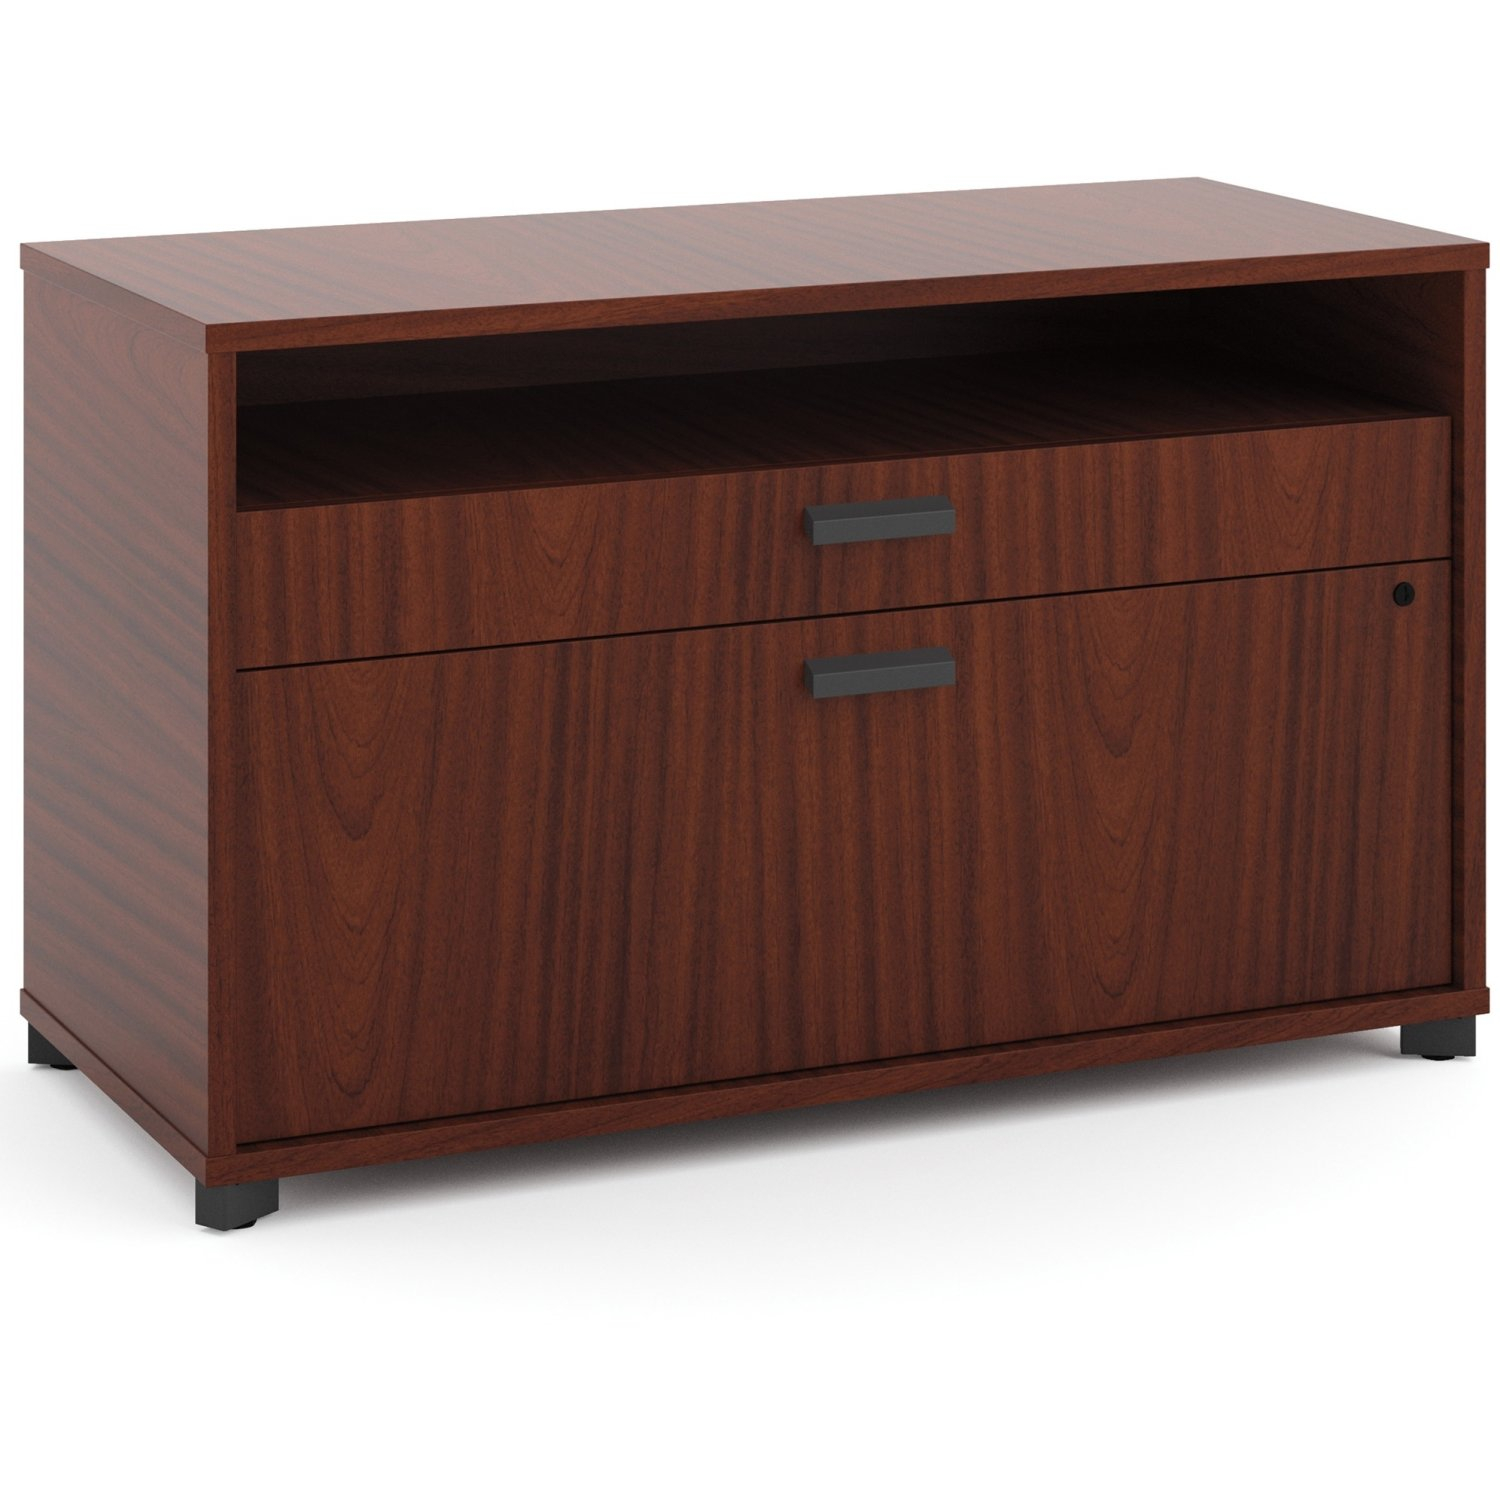 Hon Manage Credenza 2 Drawer Lateral Filing Cabinet Wayfair throughout proportions 1500 X 1500